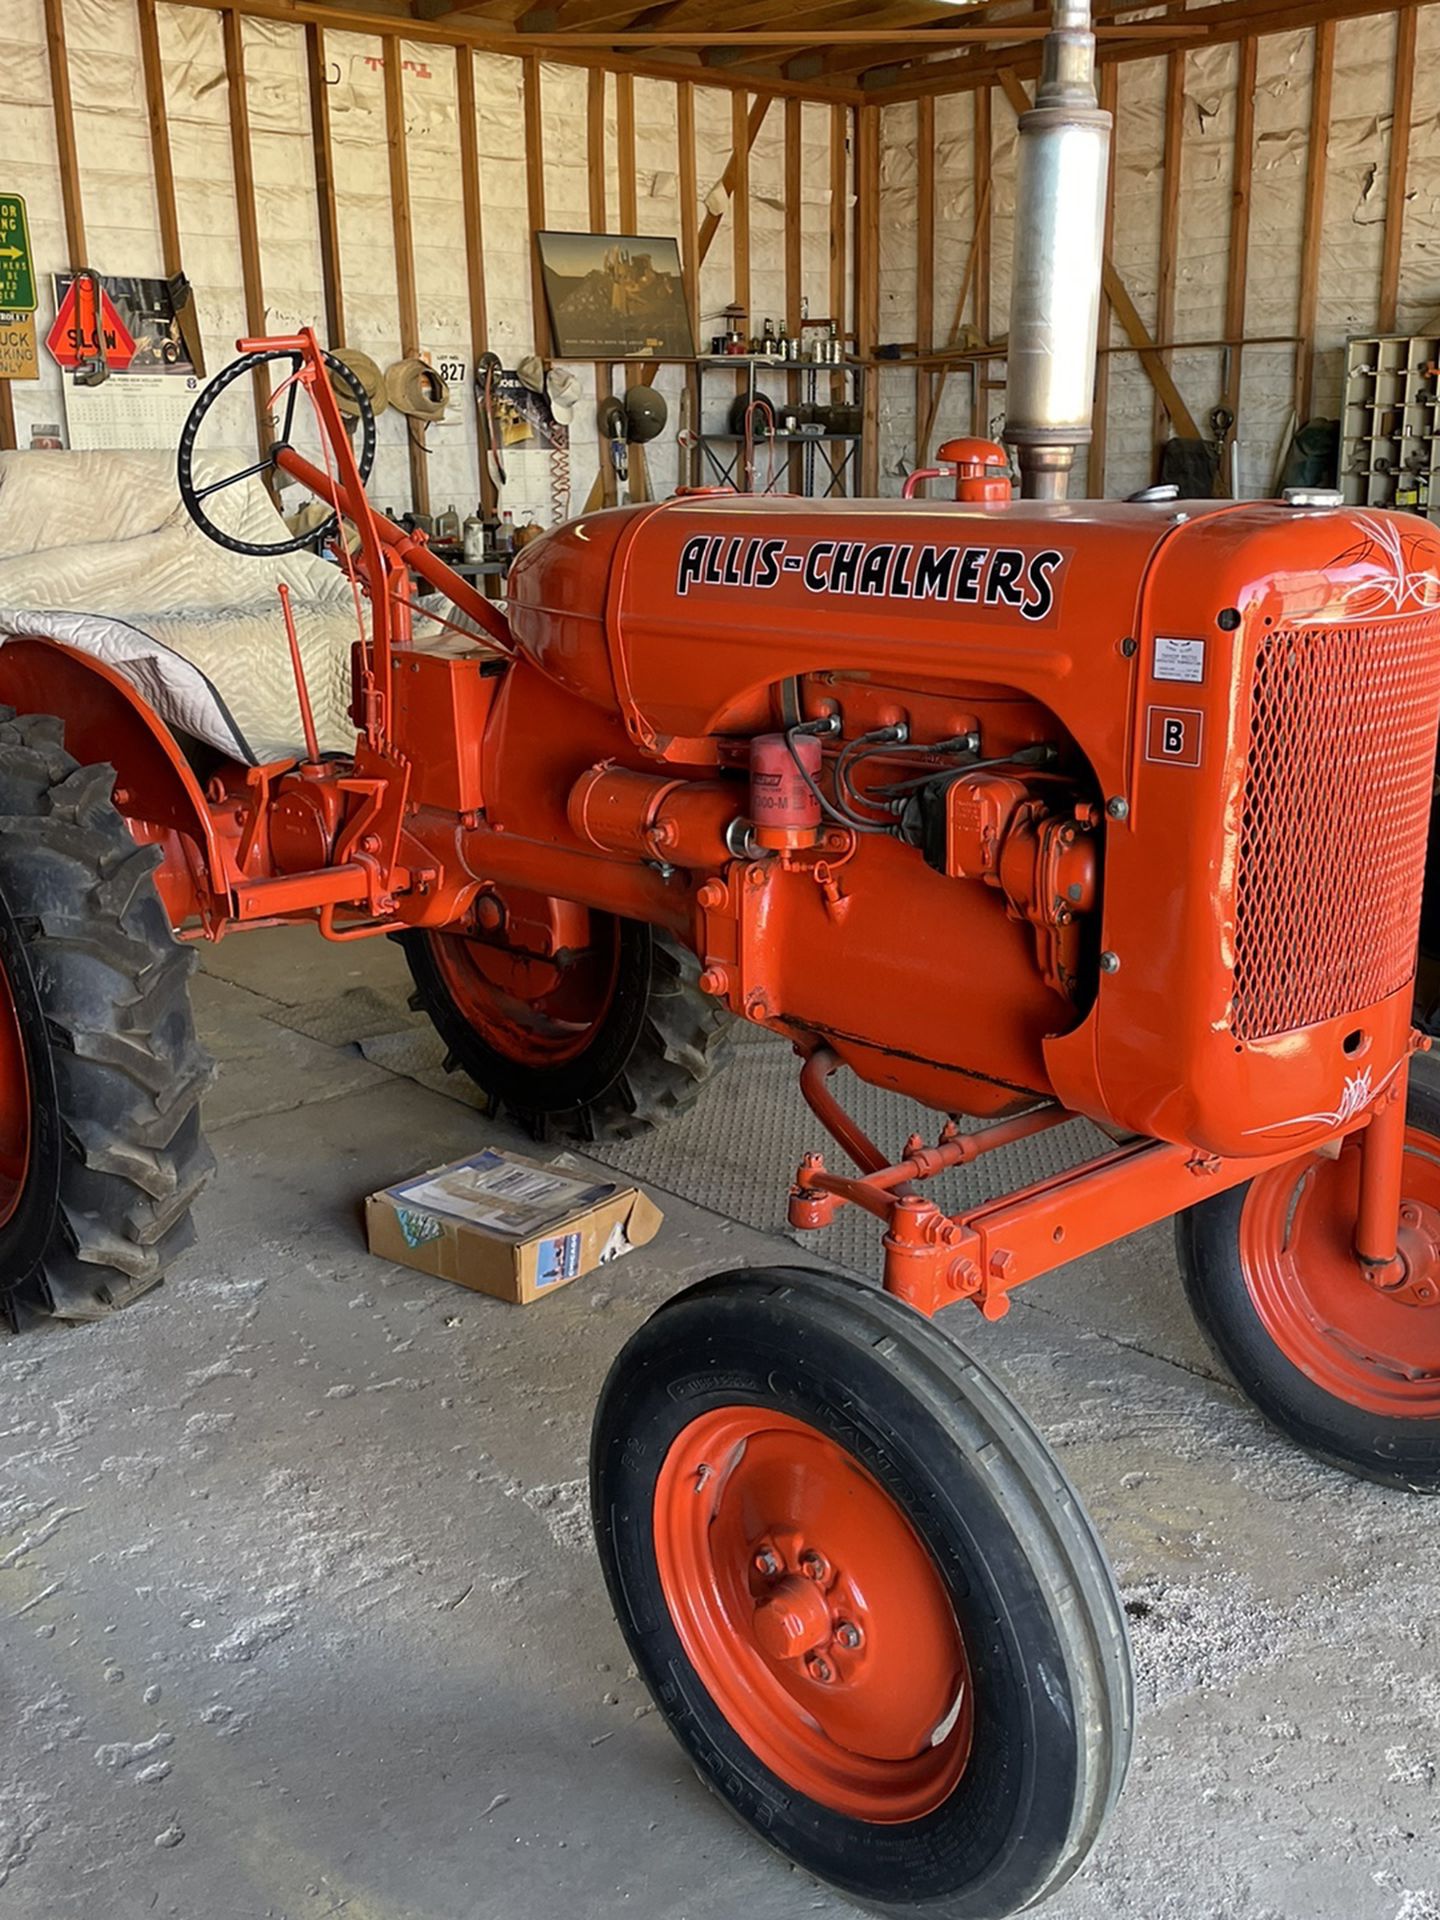 Allie-Chalmers Tractor